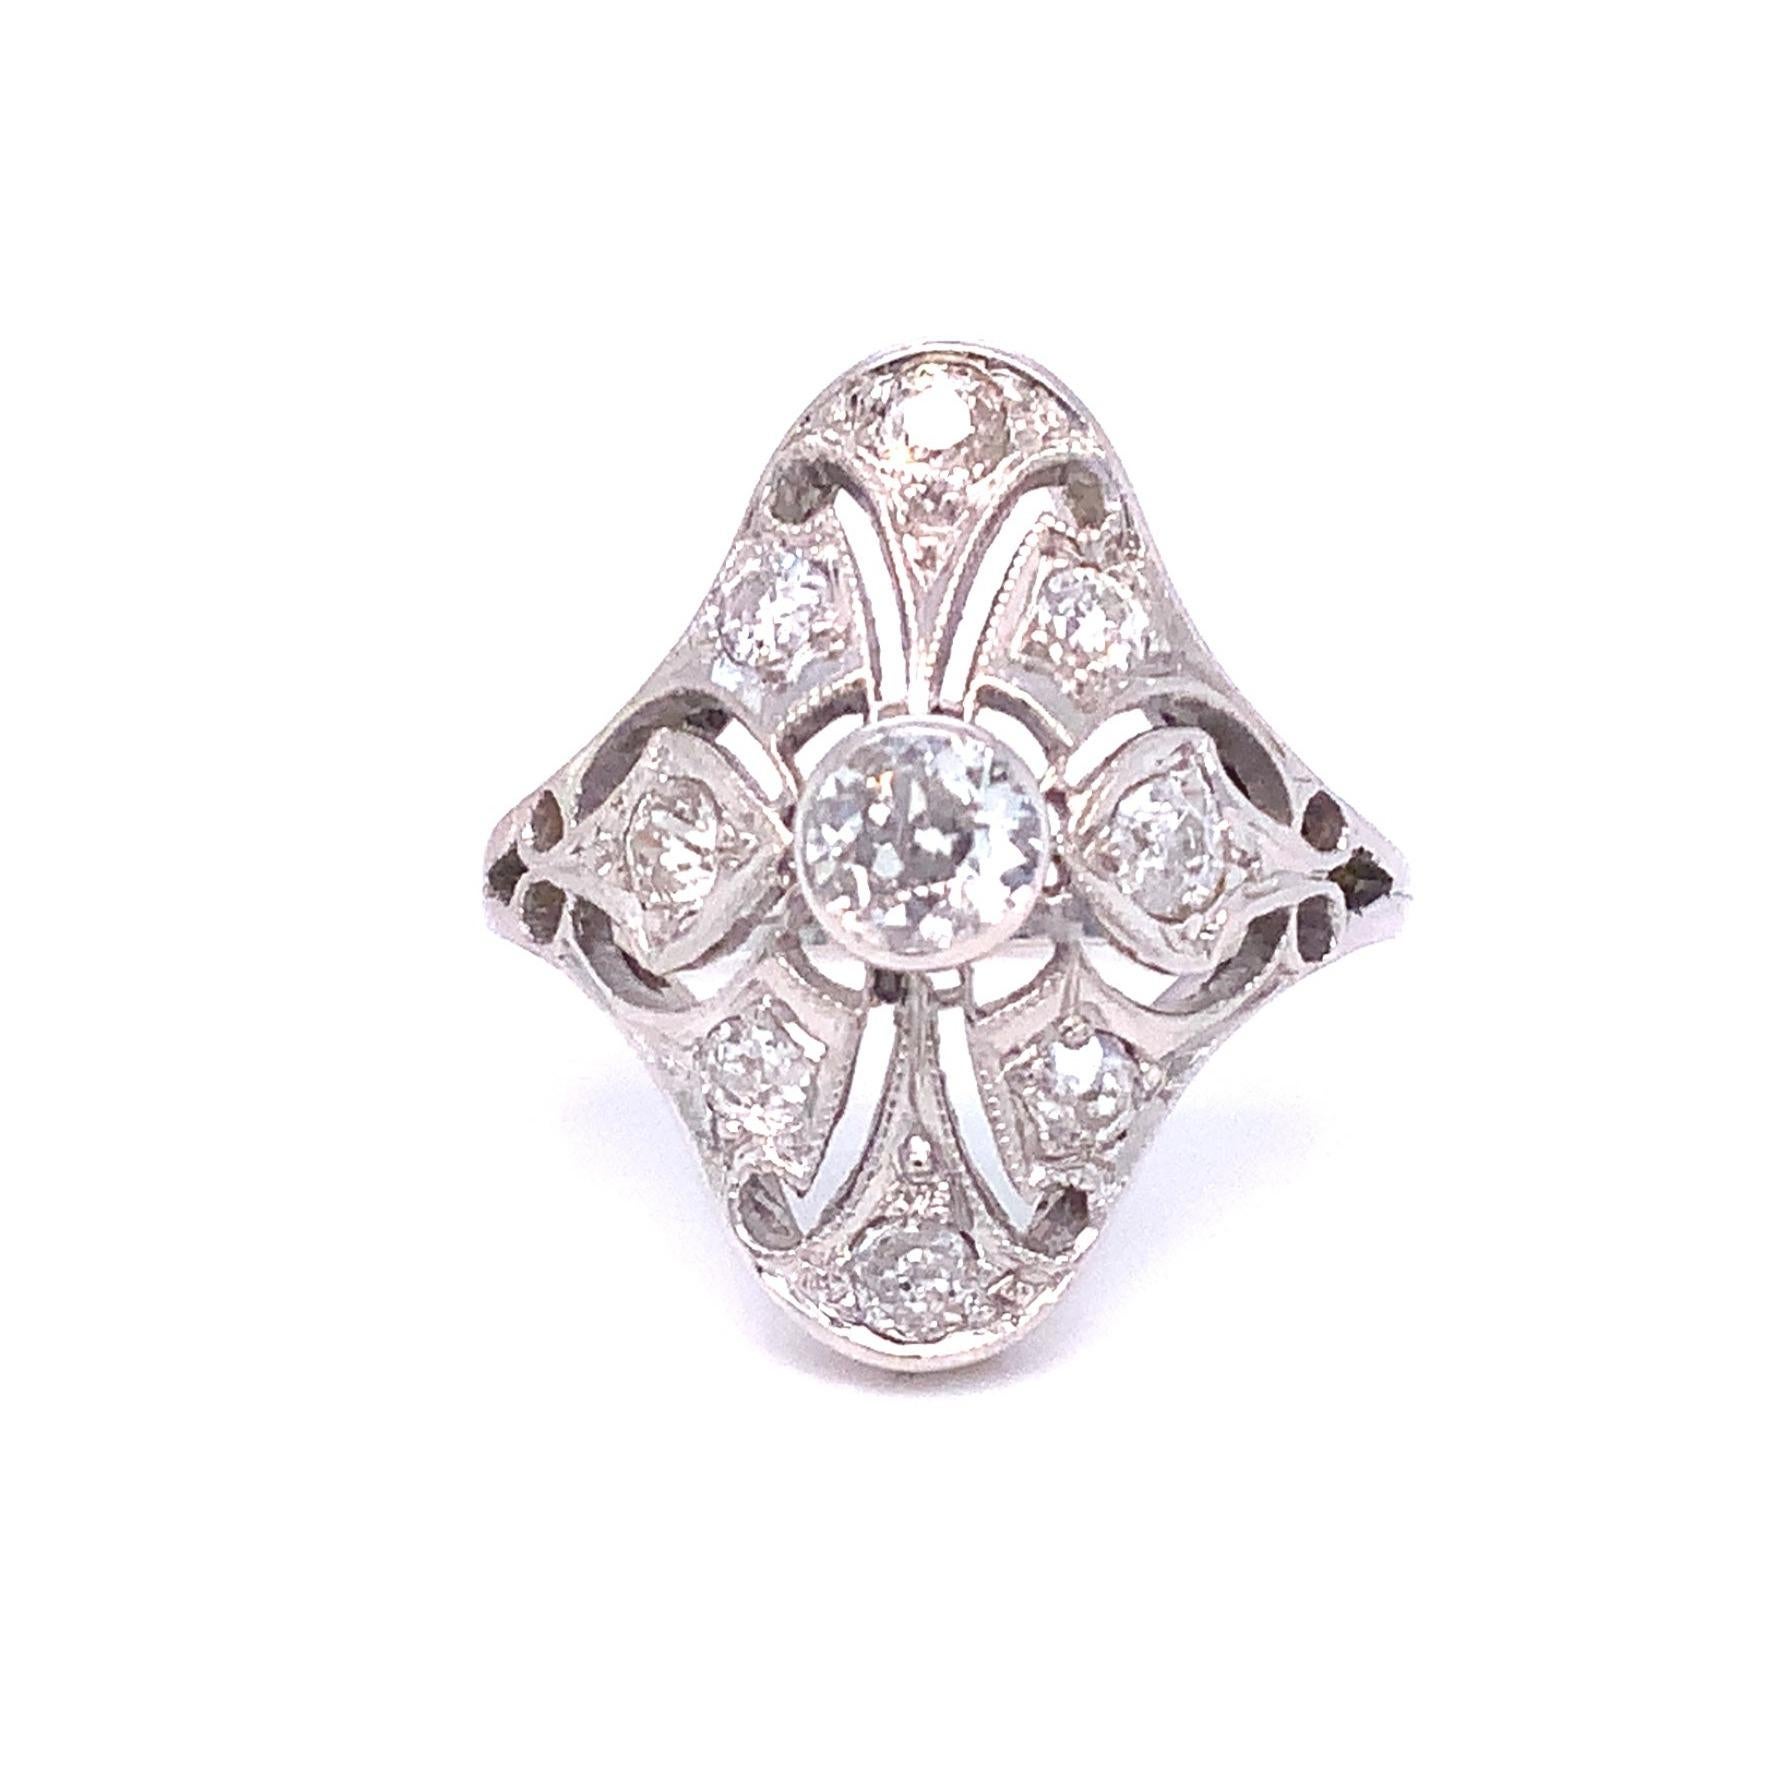 Antique Art Deco Fillagree Diamond Ring set in 14 kt White Gold
This one-of-a-kind Antique Fillagree Diamond Ring is crafted in 14 kt White Gold and encrusted with 9 dazzling diamonds. Show off your unique style with this beautiful, timeless piece.